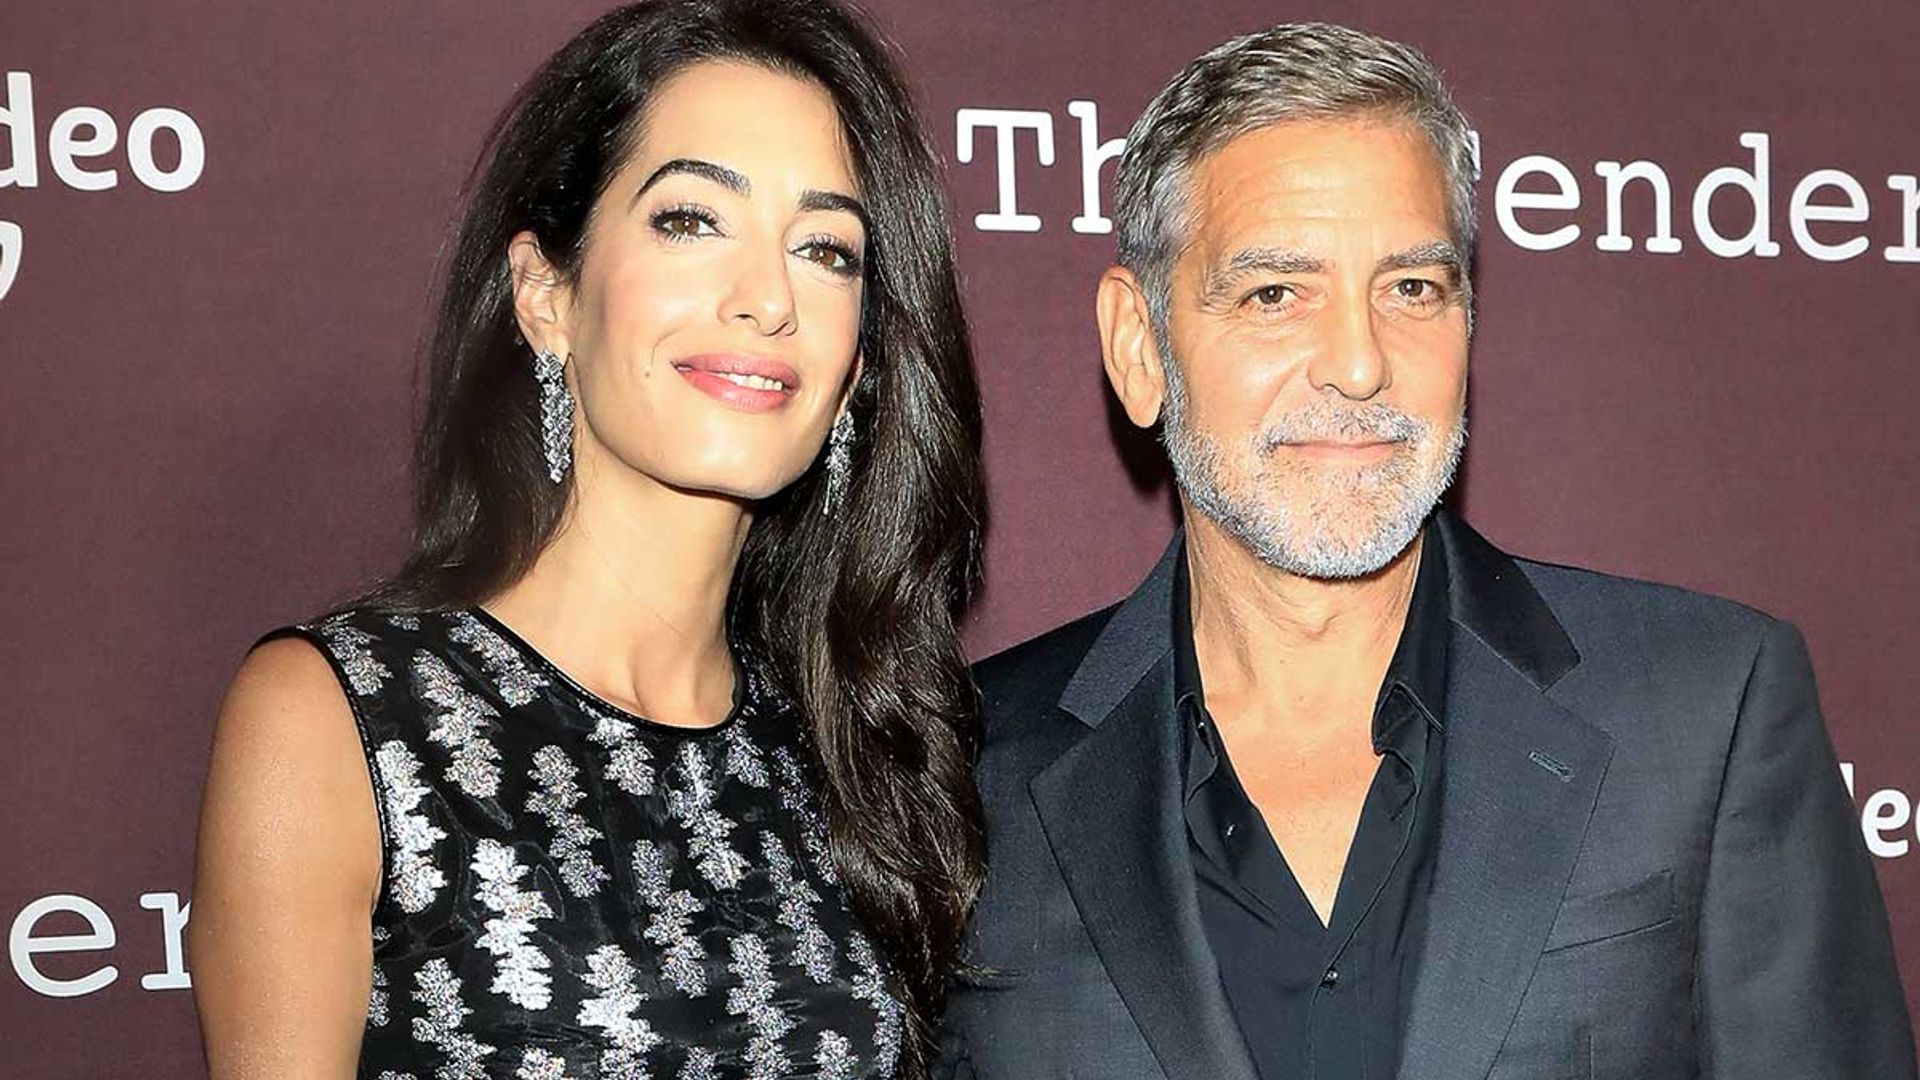 George Clooney makes startling parenting confession in candid rare interview